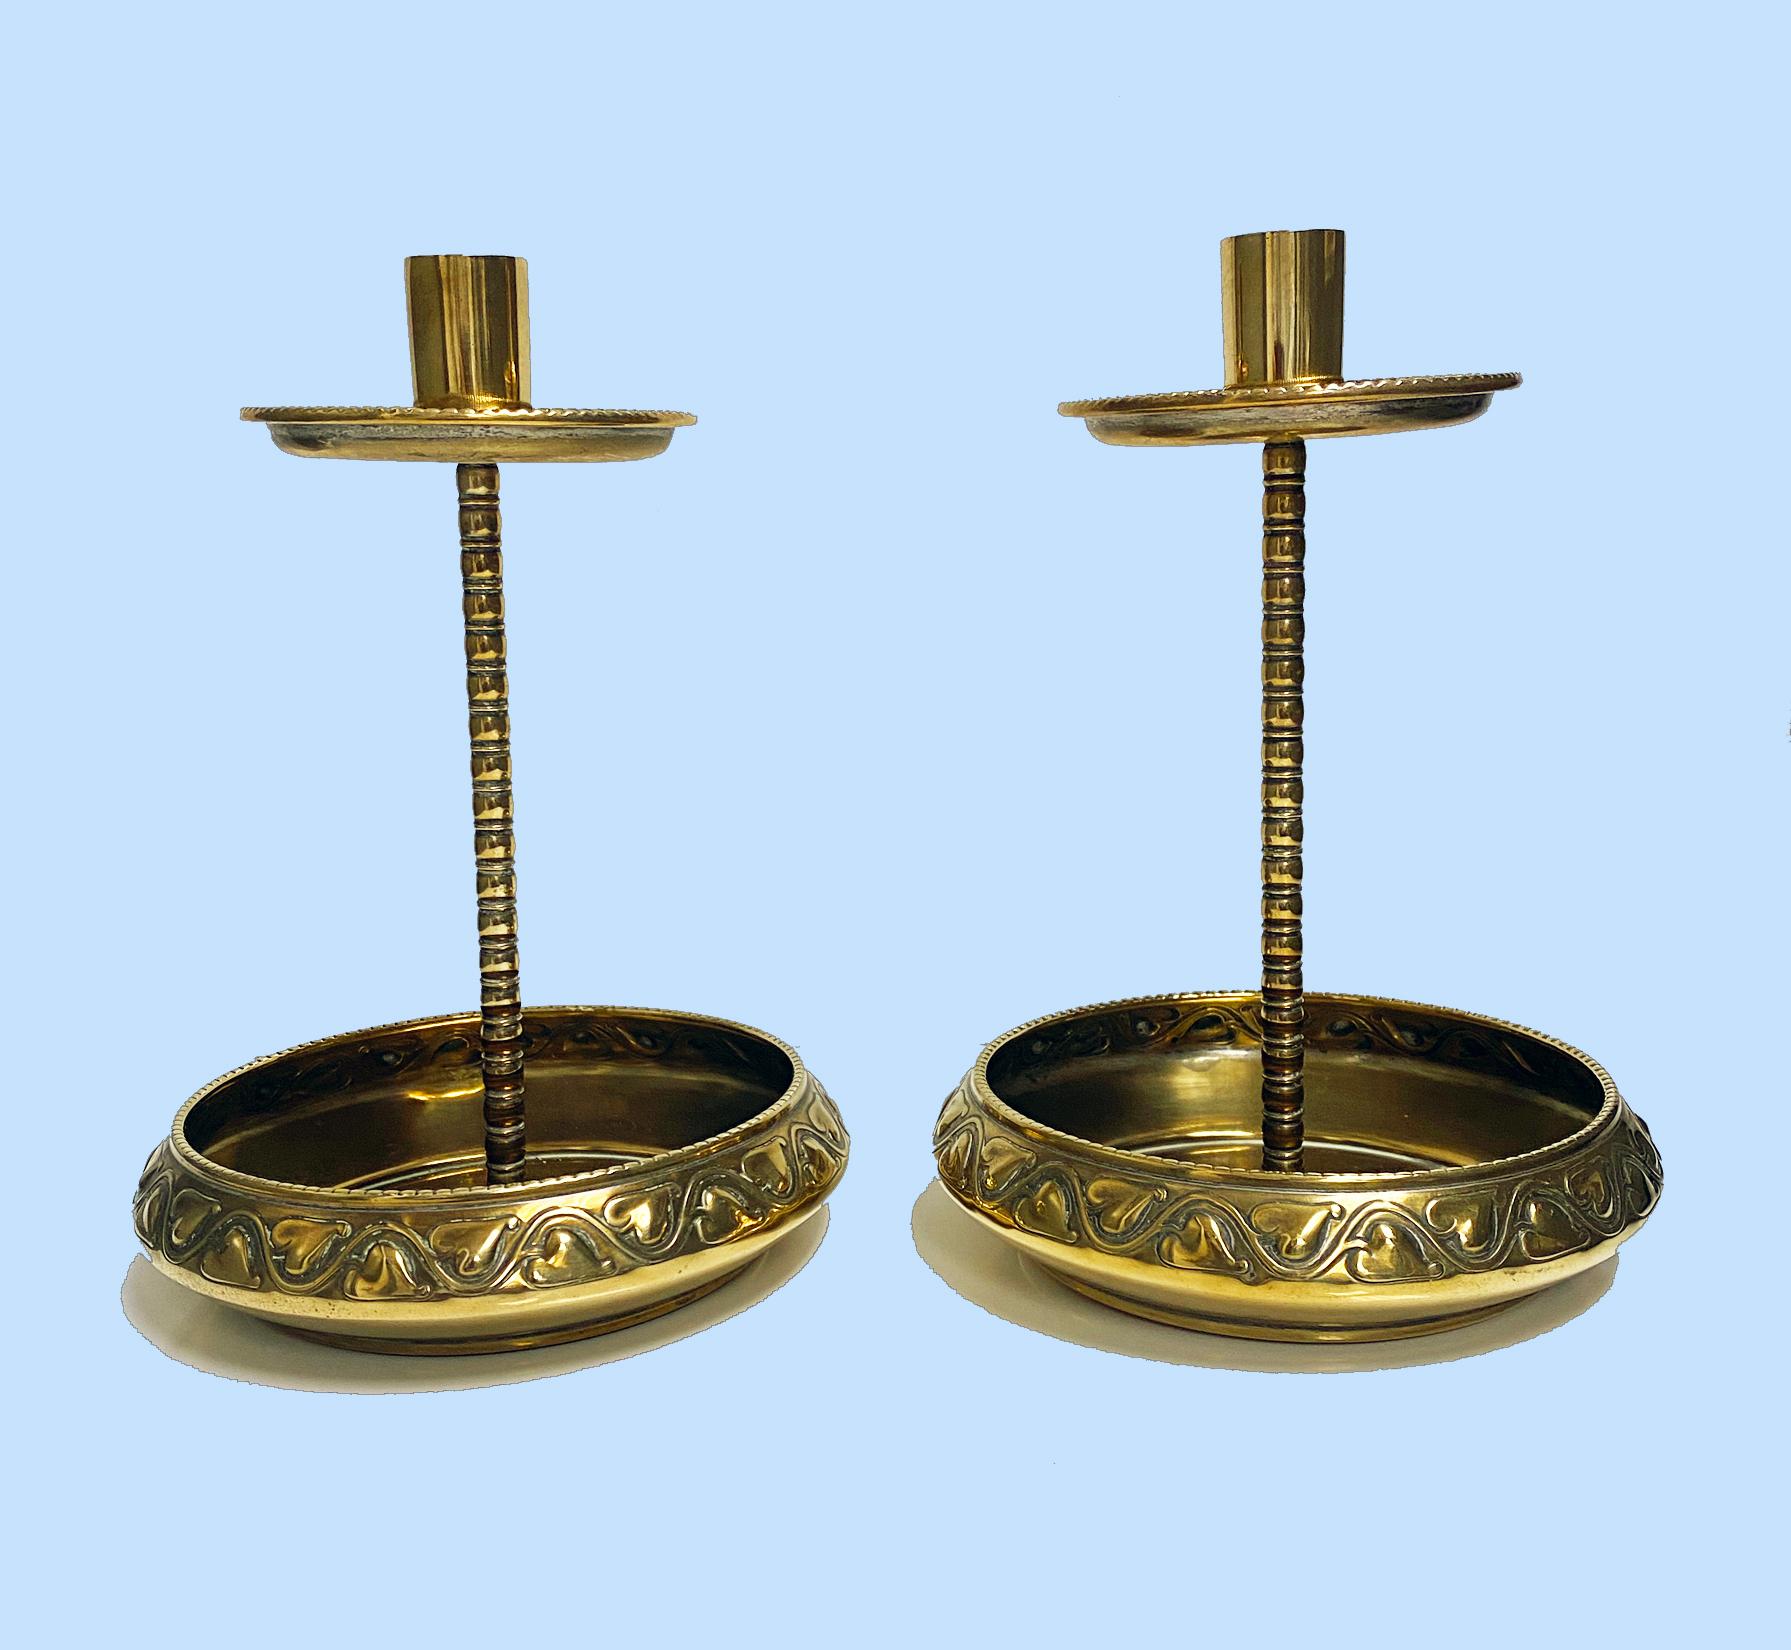 Pair of WMF brass Arts Crafts candlesticks C.1900. Unusual deep bases with heart swirl design decoration surround, bead borders and ovolo tubular central stems. Original rich brass patina. Have not been polished up. All pieces unscrew for easy